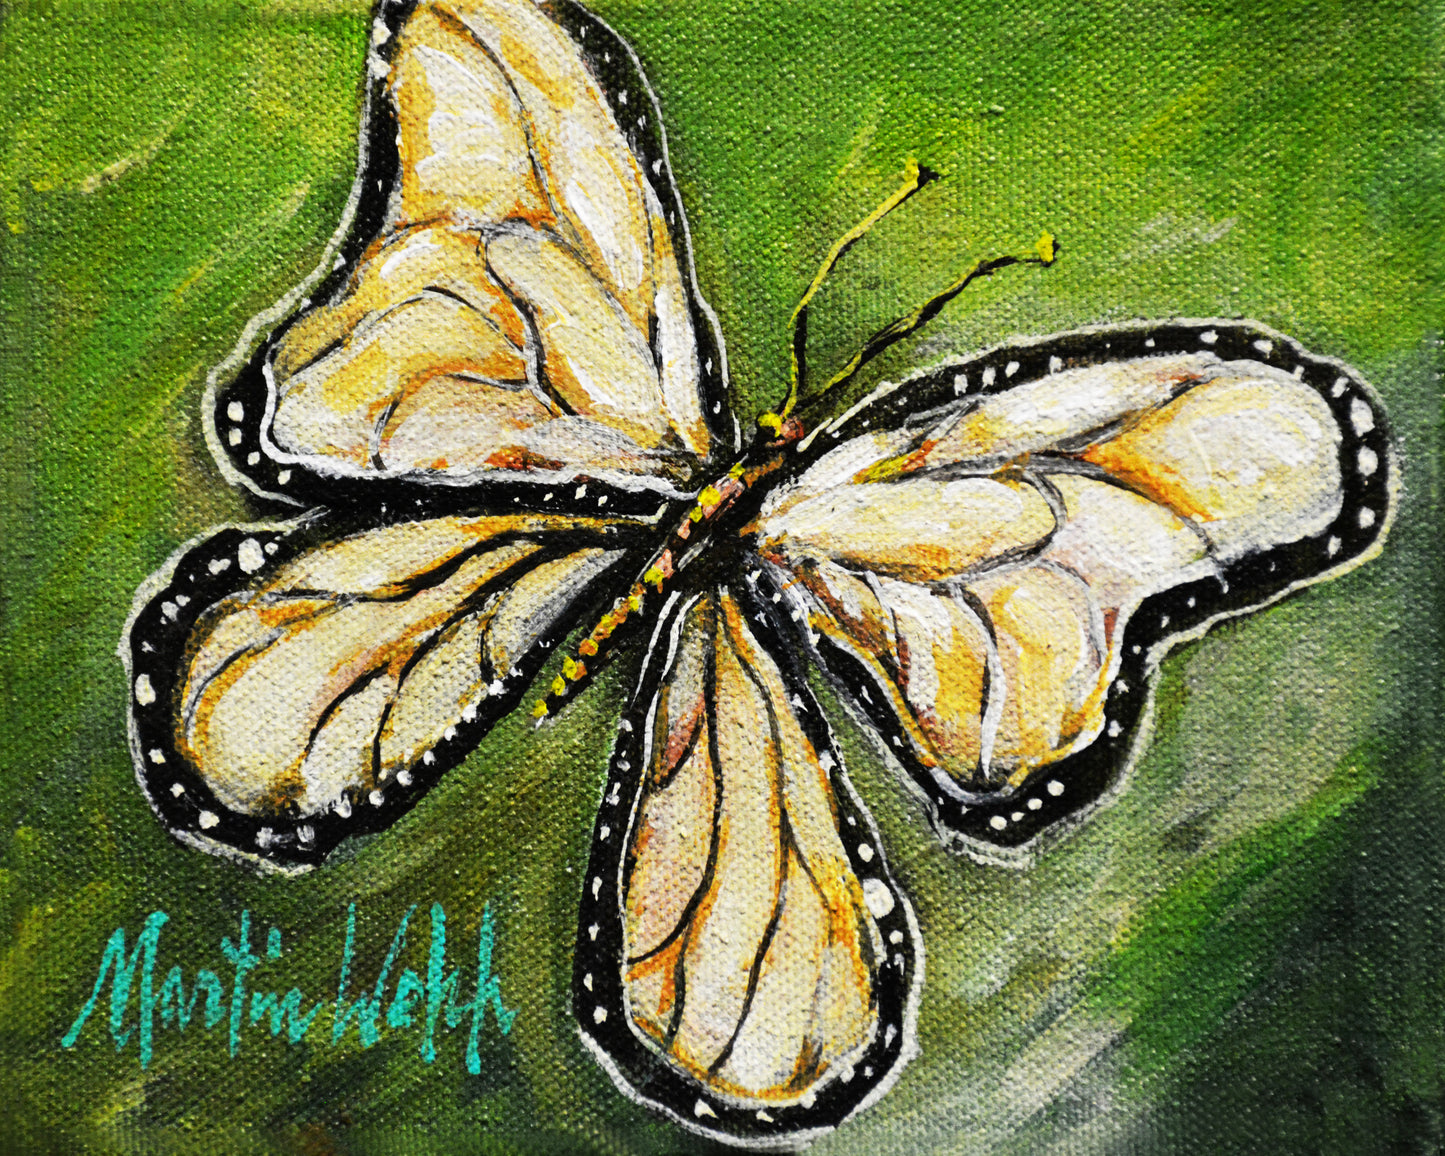 White Butterfly - Butterfly - 11"x14" Print